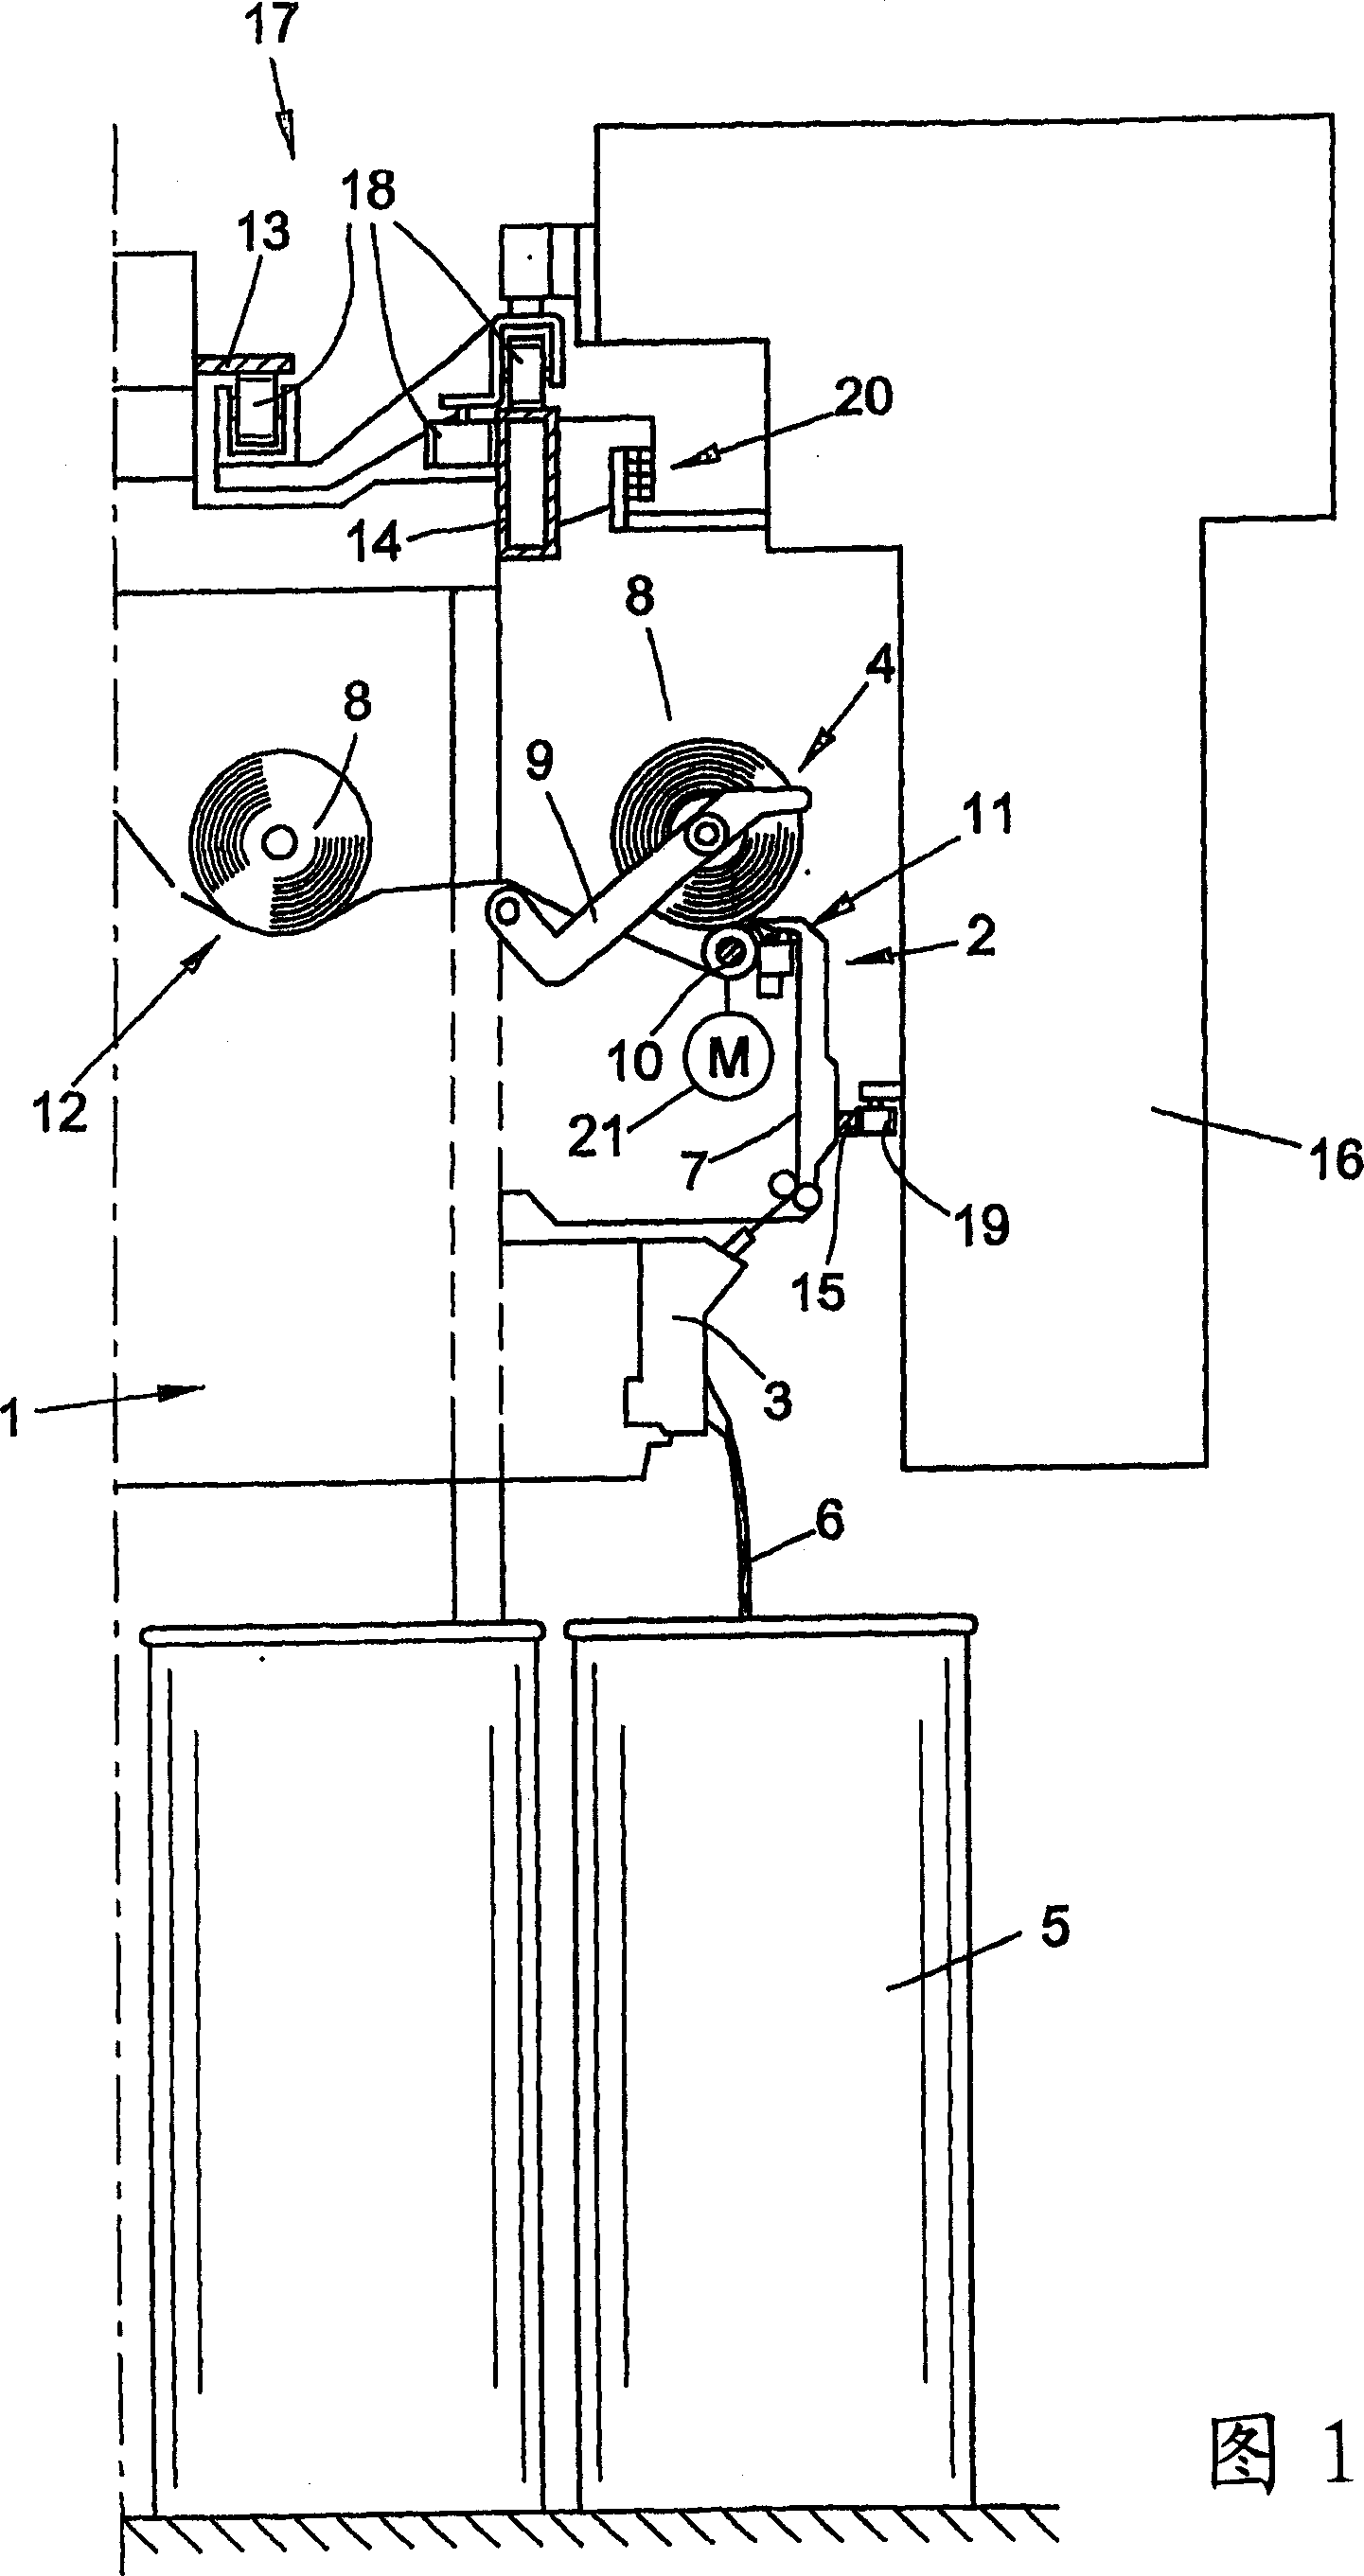 Thread transversing device for a winding device of a cross-wound bobbin producing textile machine